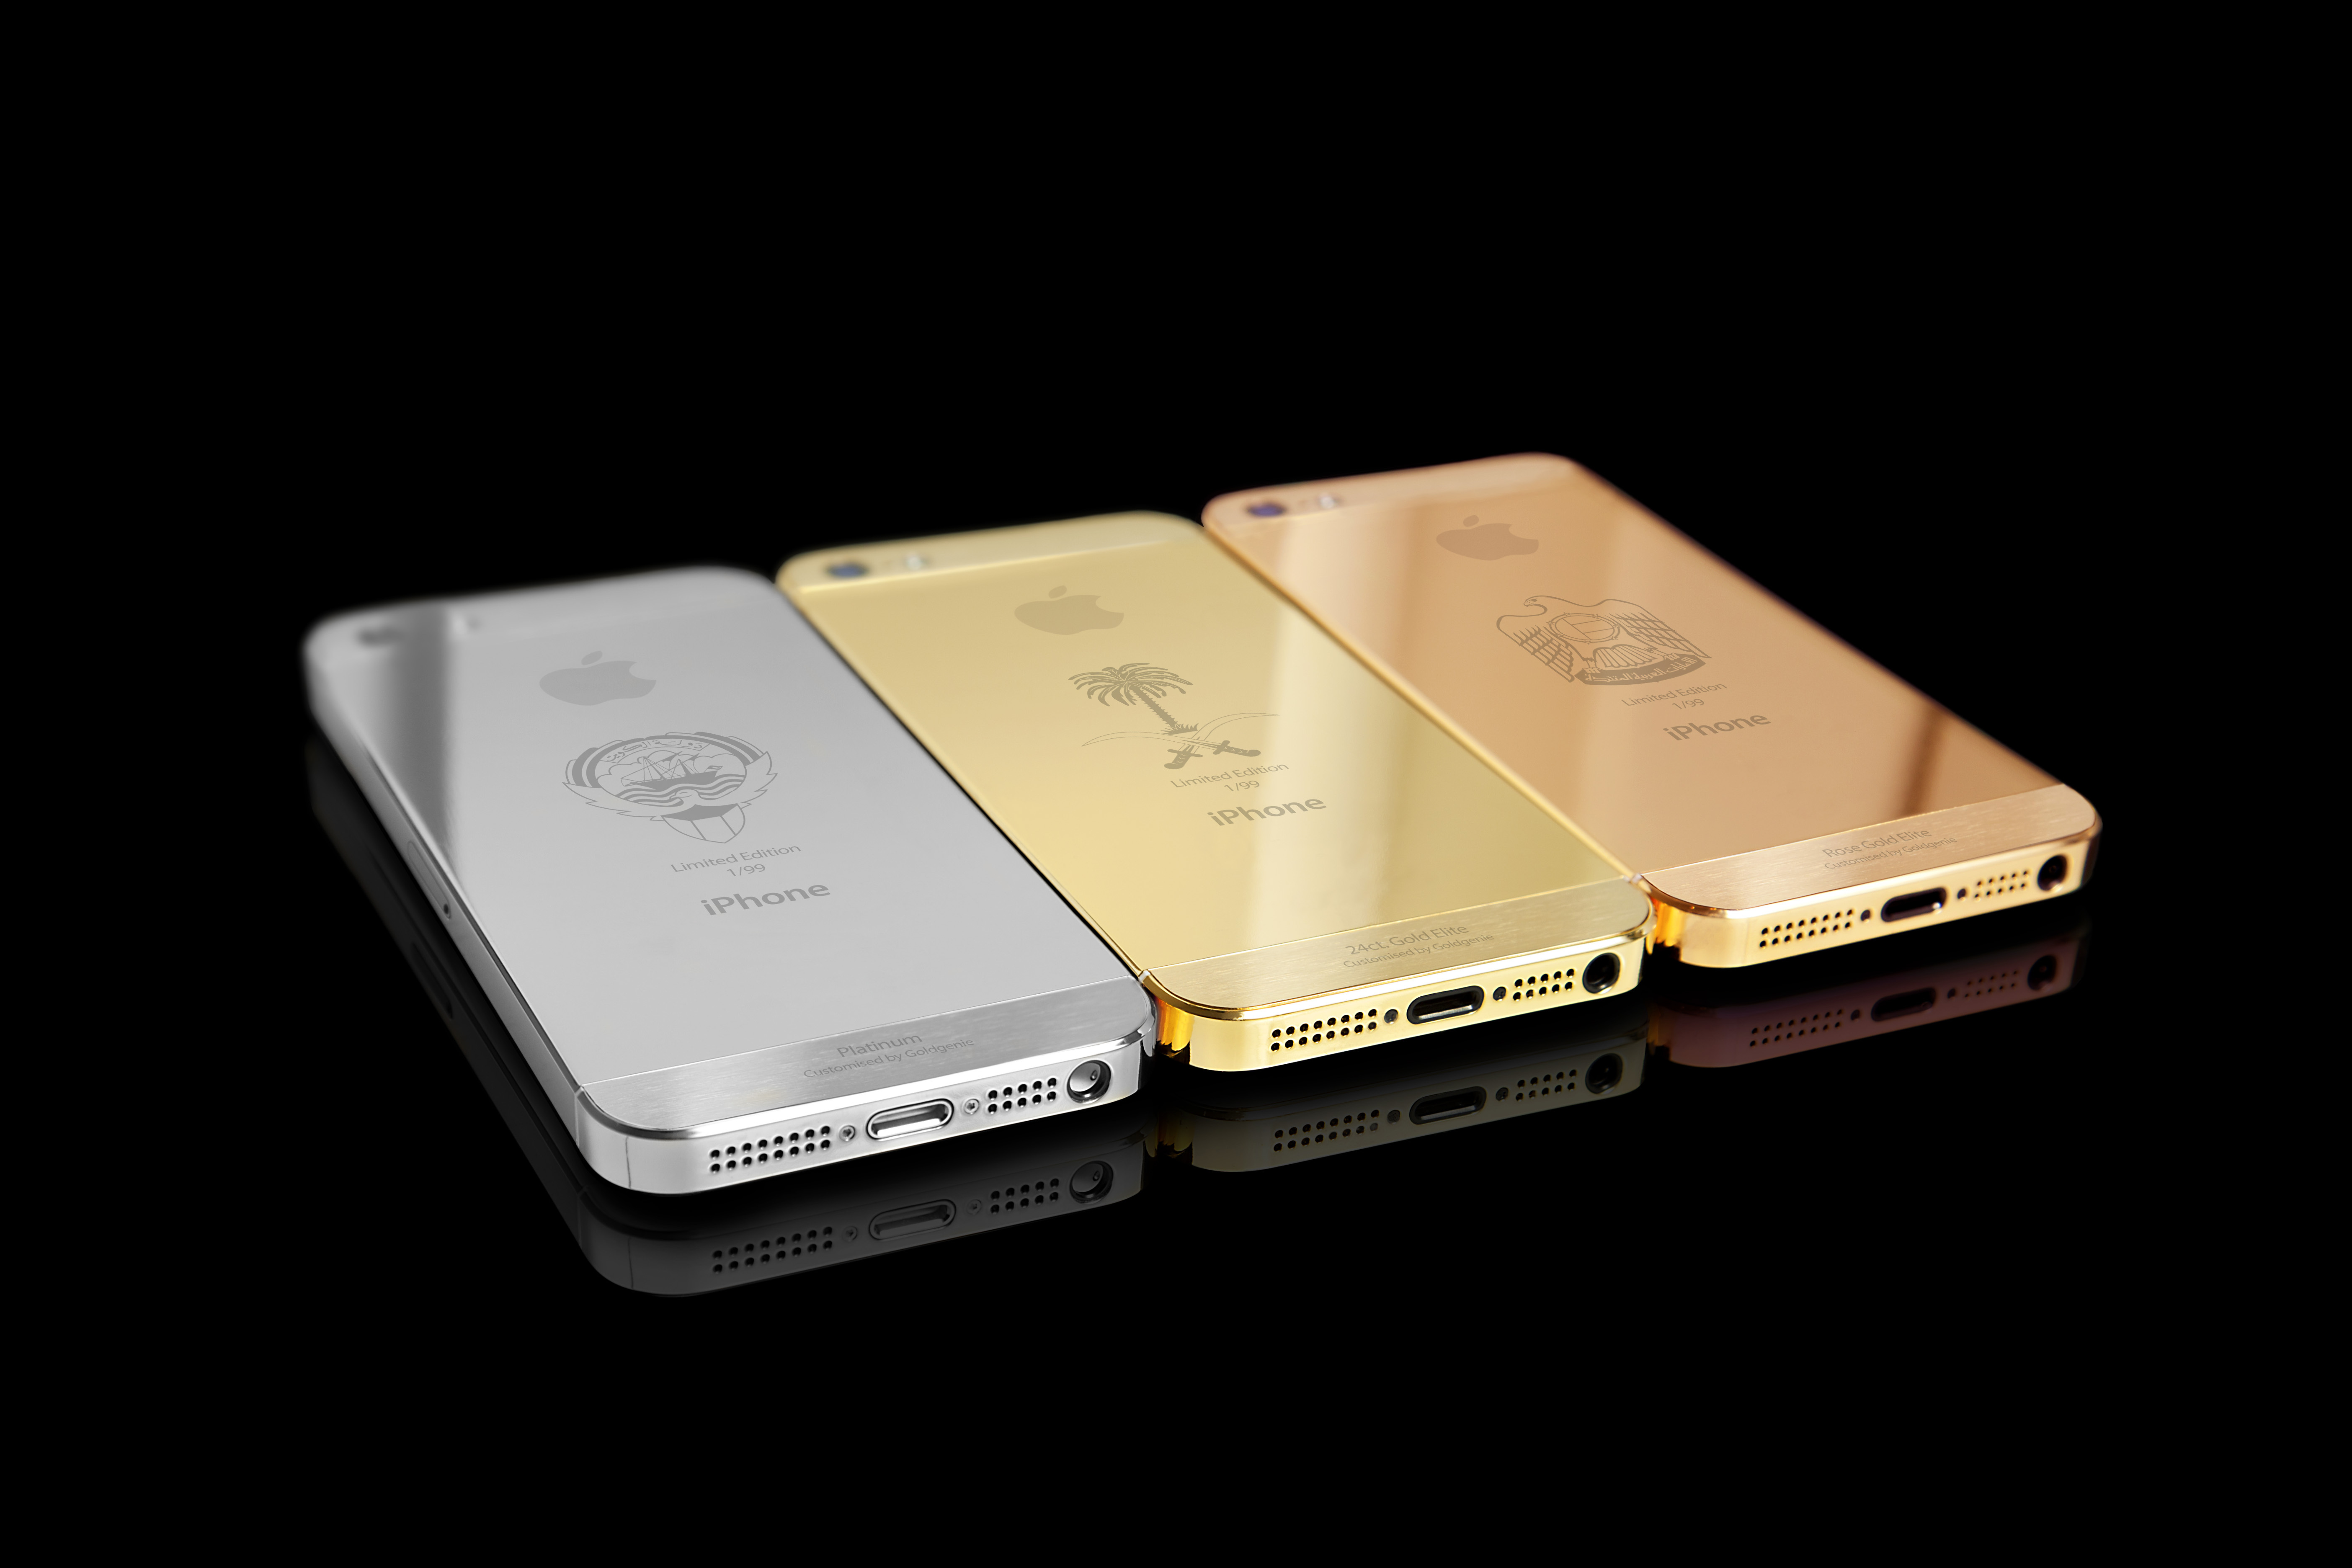 Iphone 5 Gold Edition Limited edition 24ct. gold